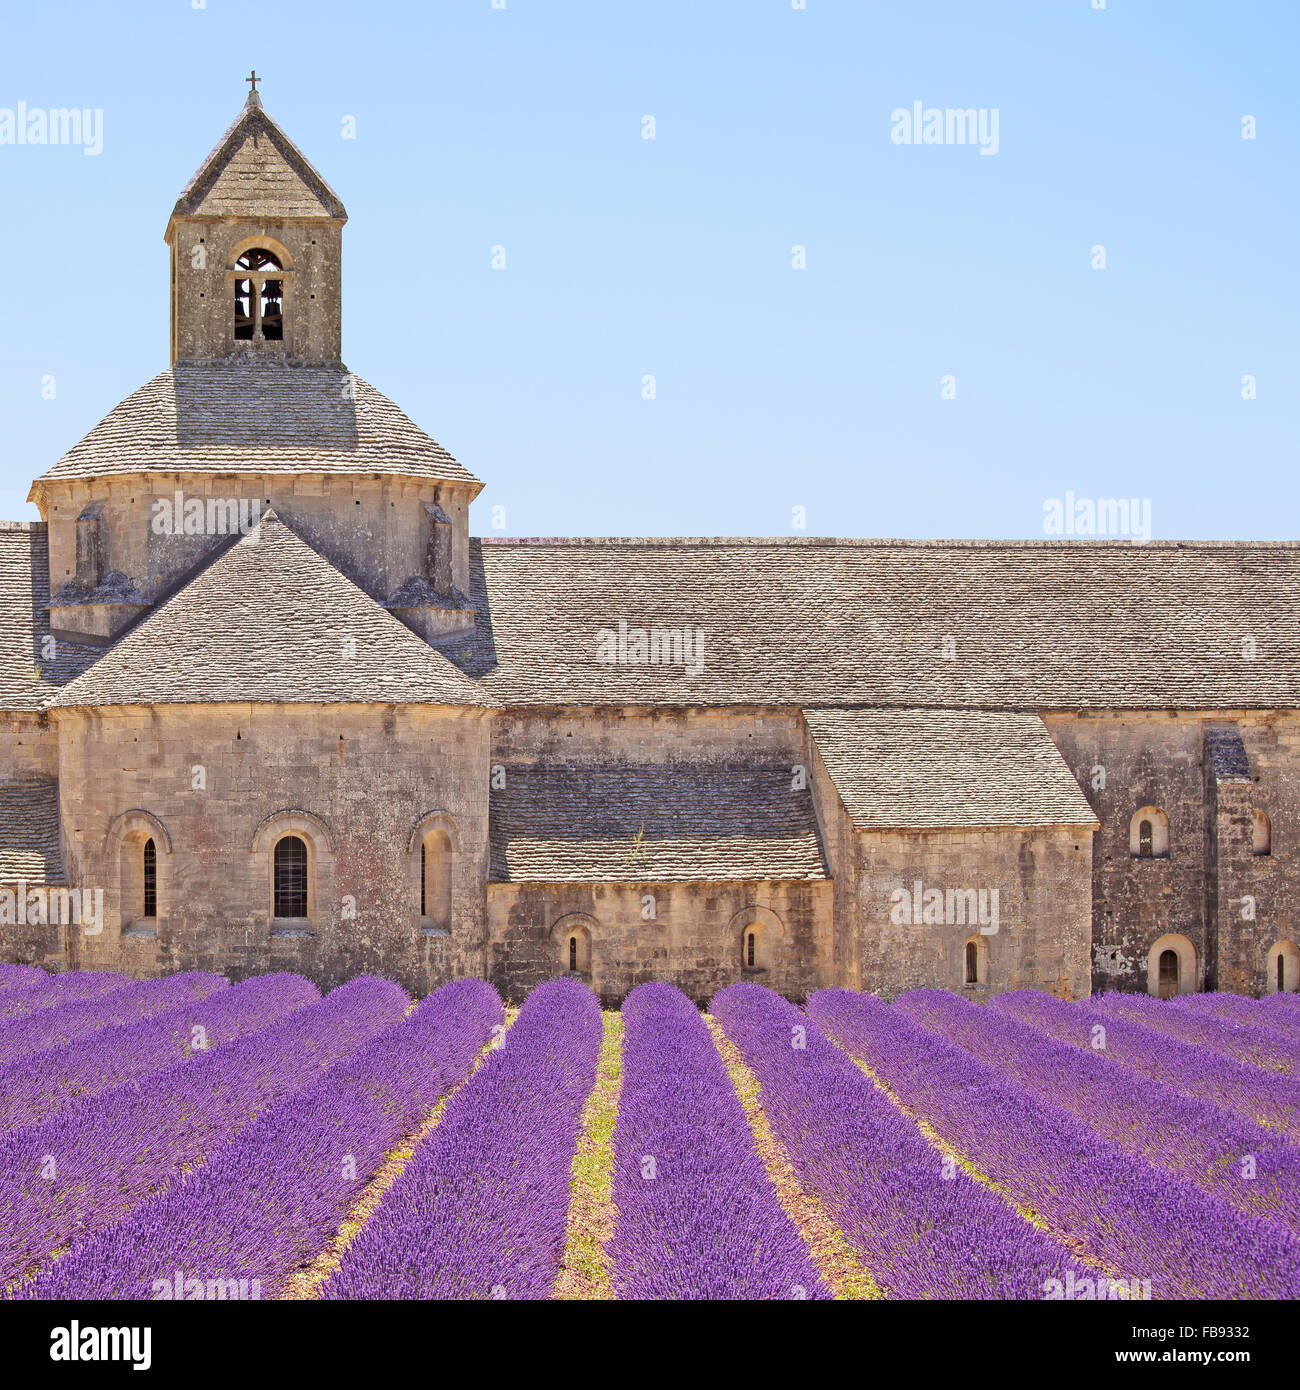 Abbey of Senanque and blooming rows lavender flowers, detail. Gordes, Luberon, Vaucluse, Provence, France, Europe. Stock Photo